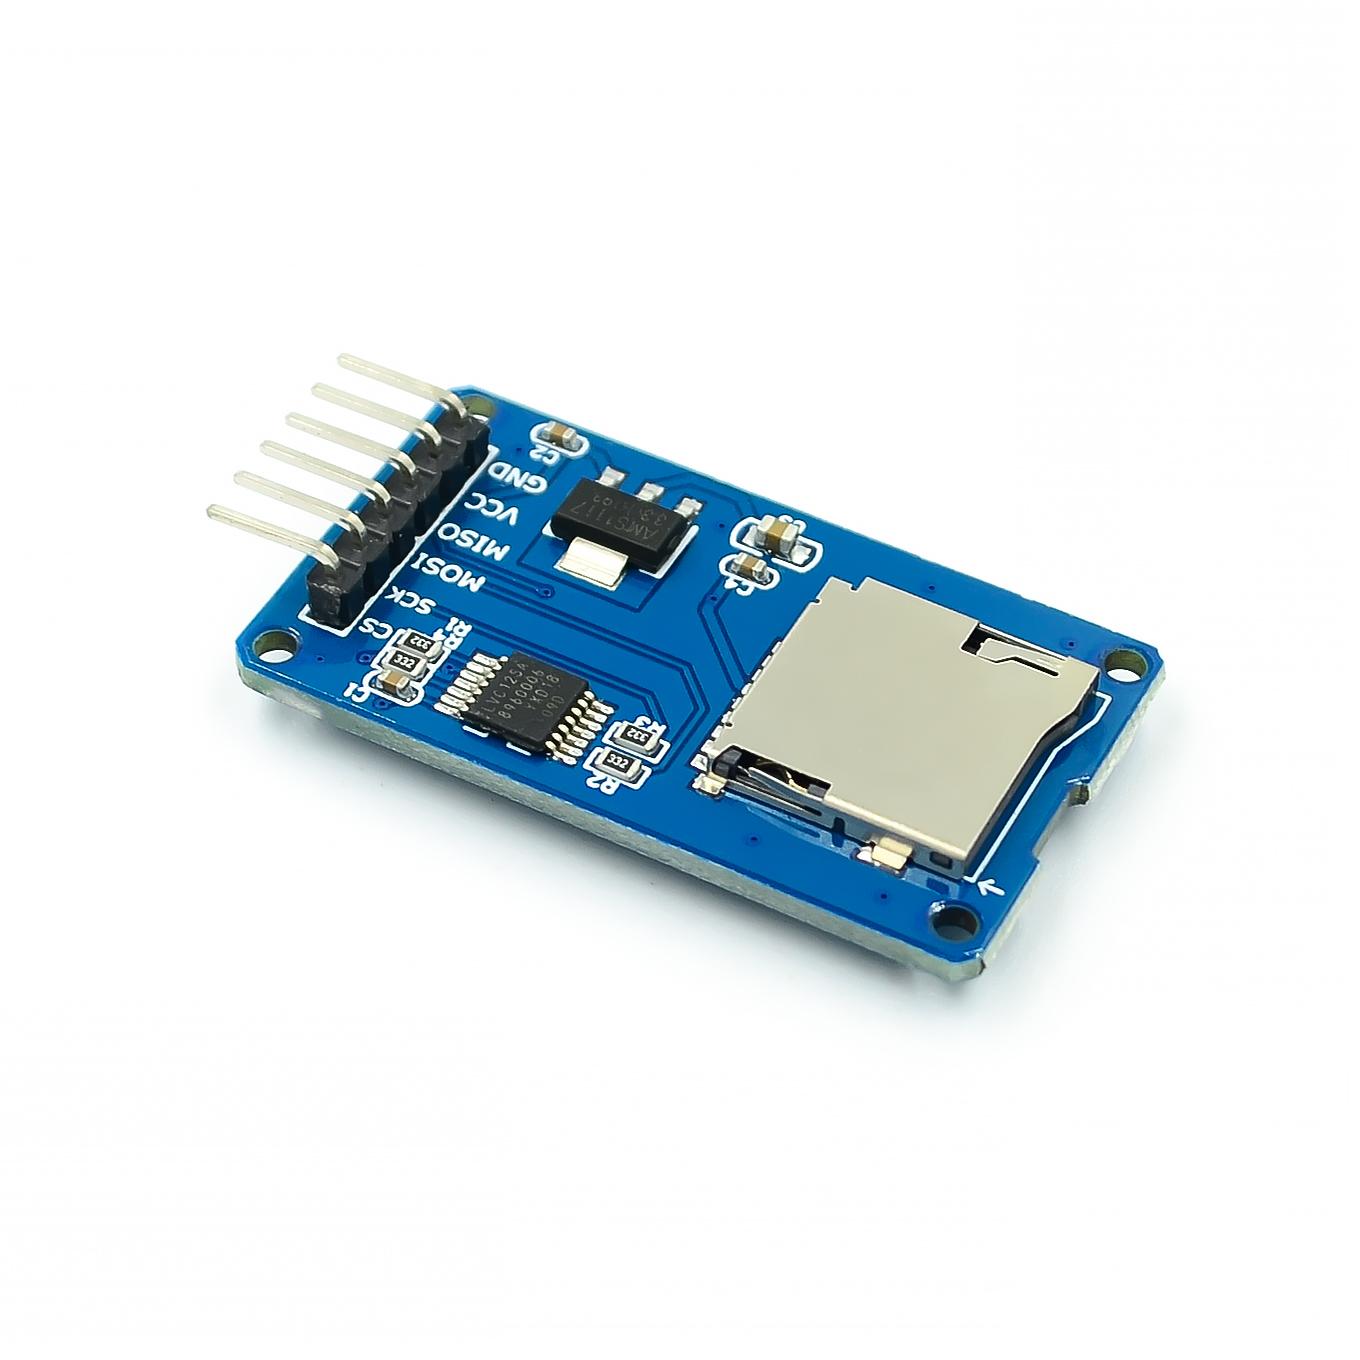 ! 10pcs/lot Micro SD card mini TF card reader module SPI interfaces with level converter chip for